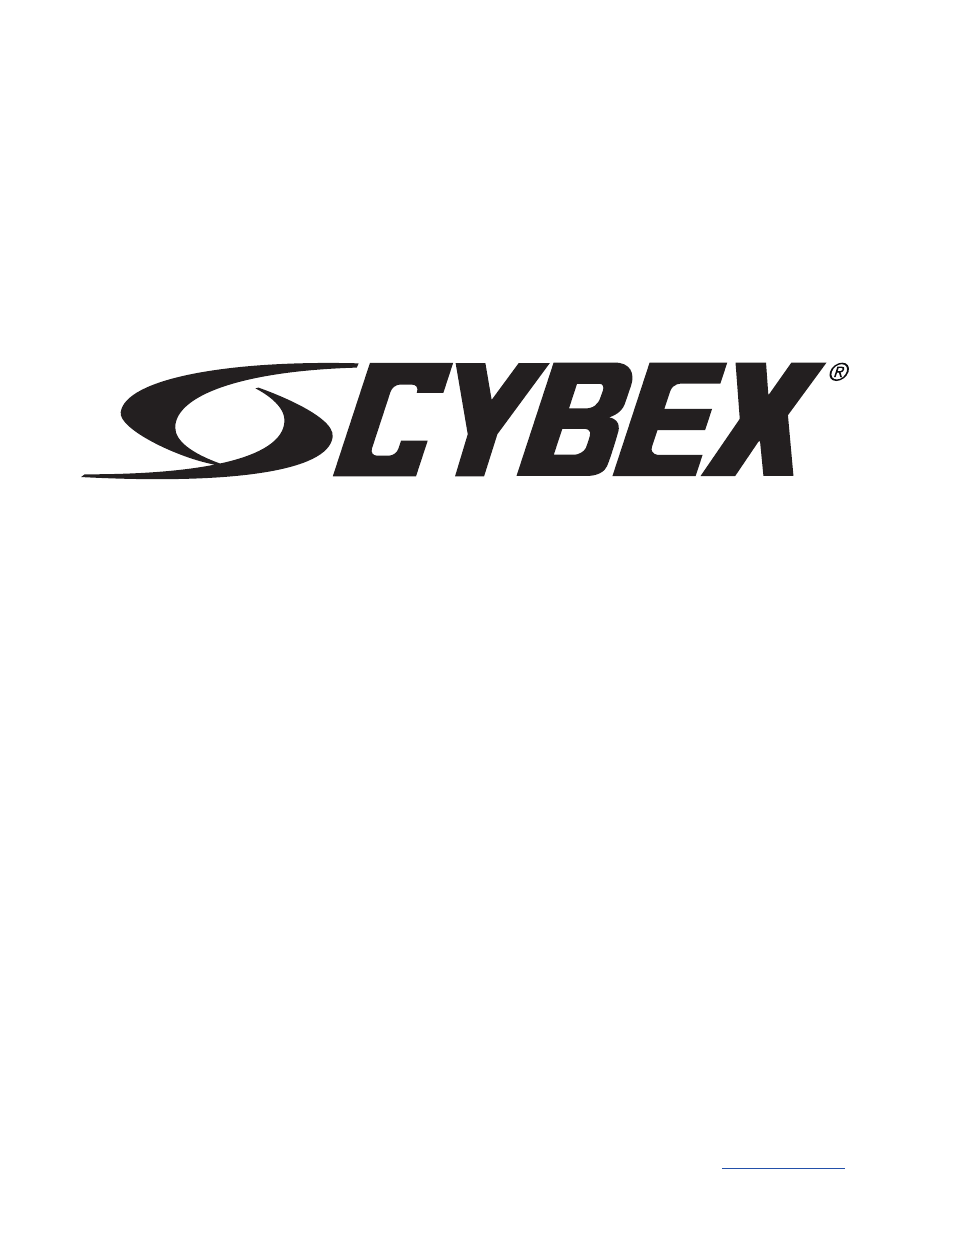 Cybex 8800 Bravo User Manual | 32 pages | Also for: 8830 Bravo